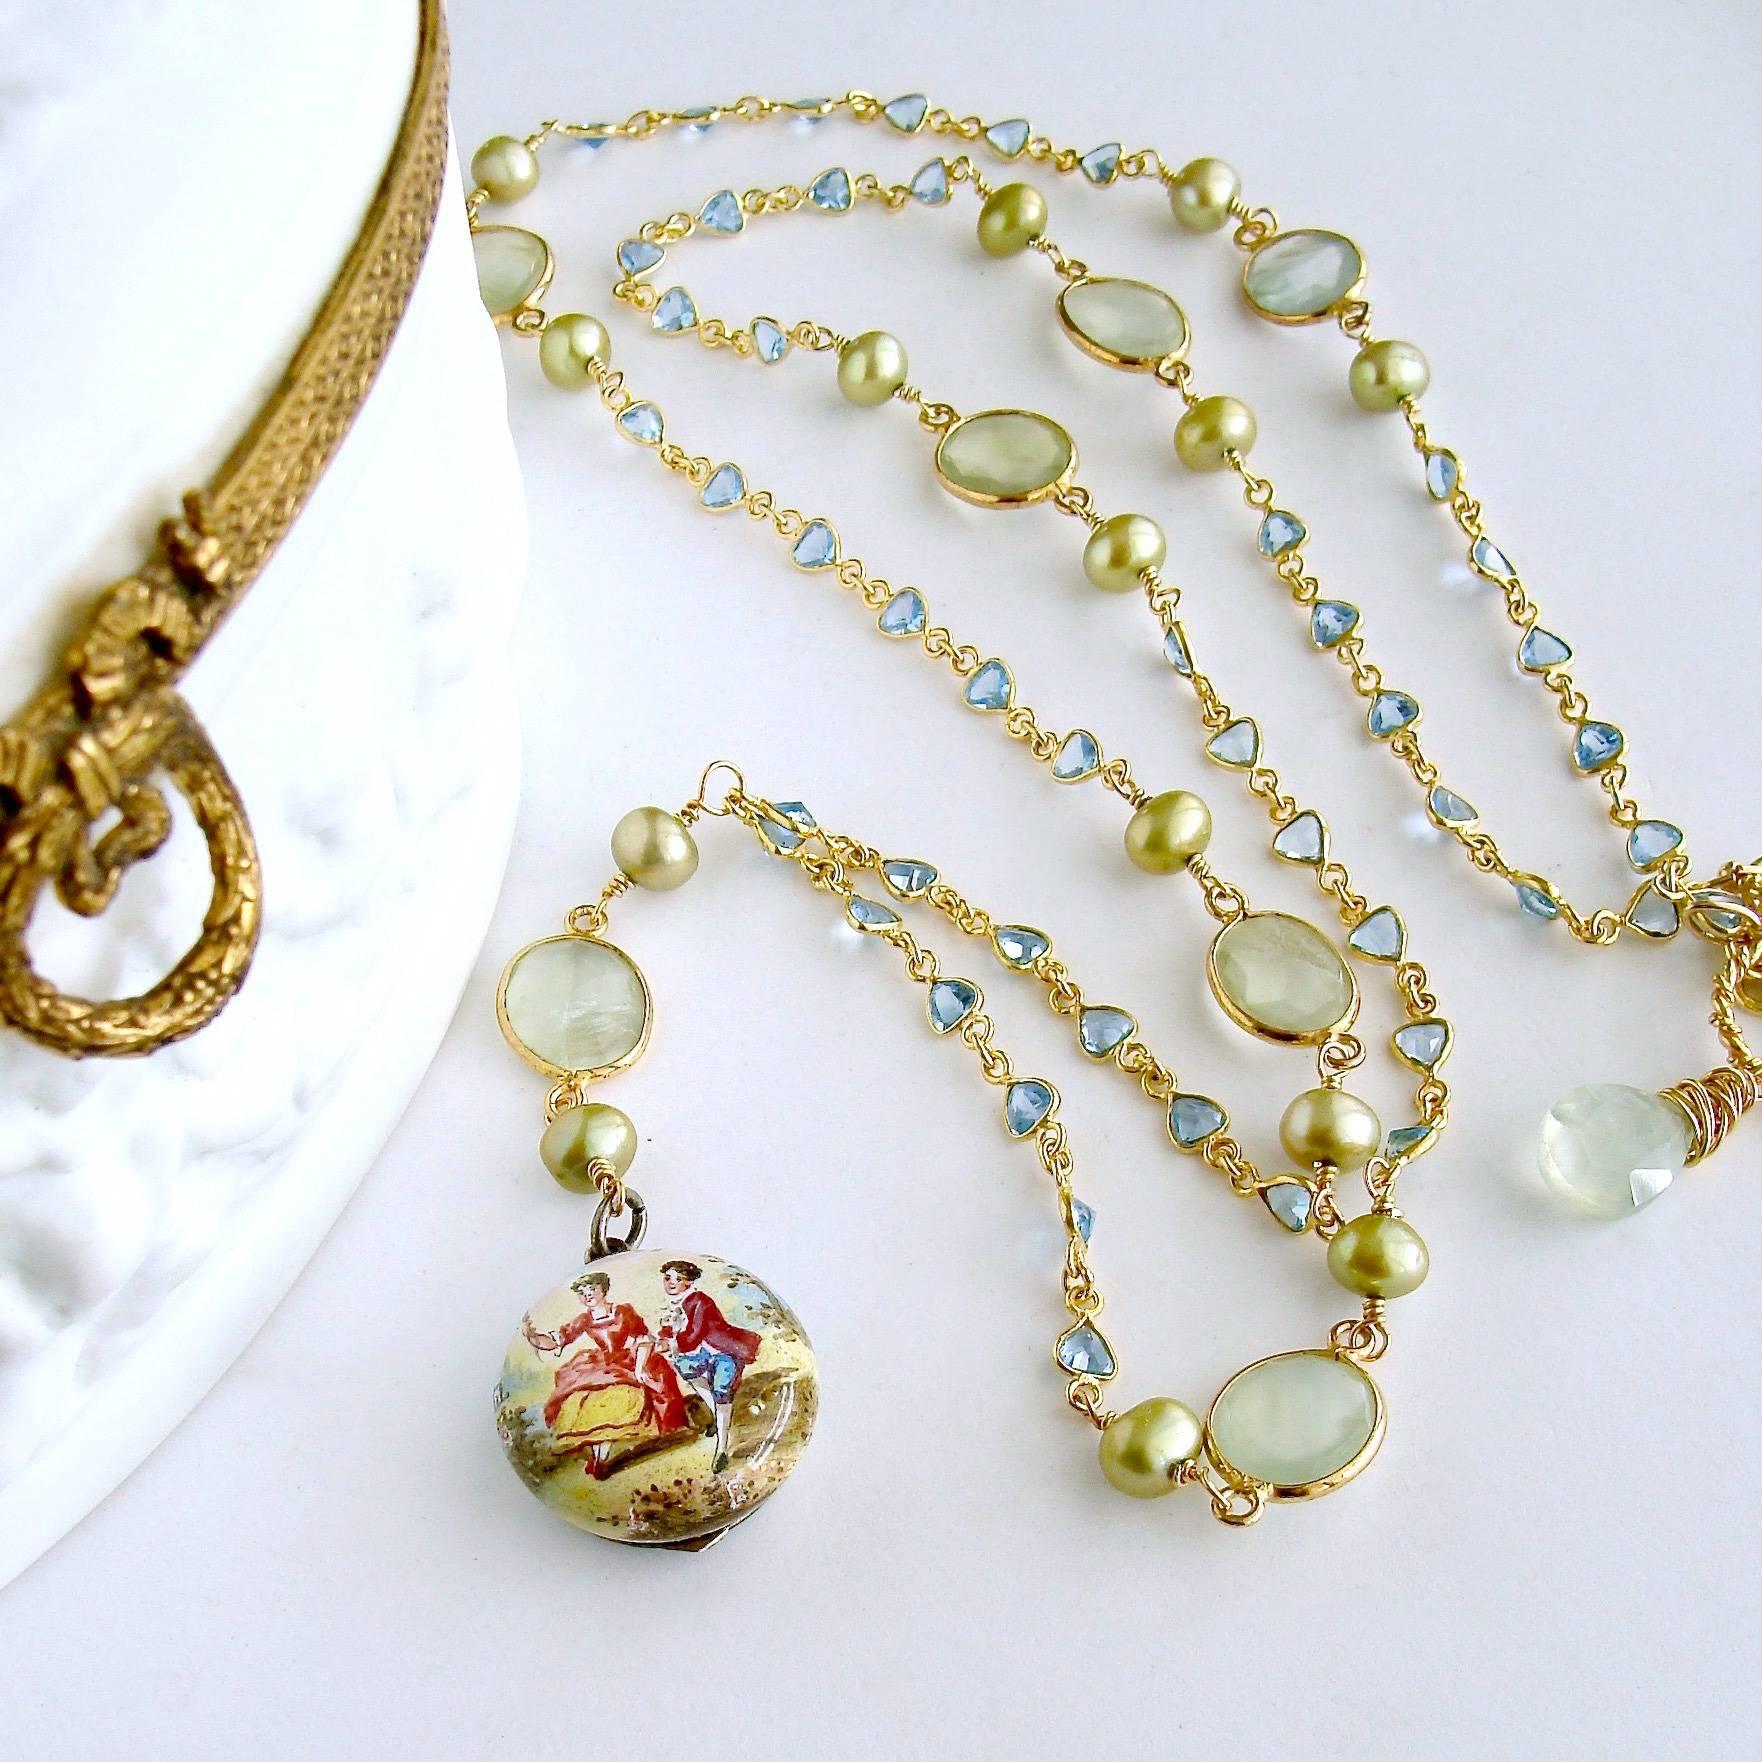 Brezza Floreale II.

A charming pastoral Samuel Goldfarb antique Viennese enamel vinaigrette scent locket (circa 1900), is suspended from a linked chain of bezel set heart shaped and faceted blue topaz and intercepted with kiwi green pearls flanking